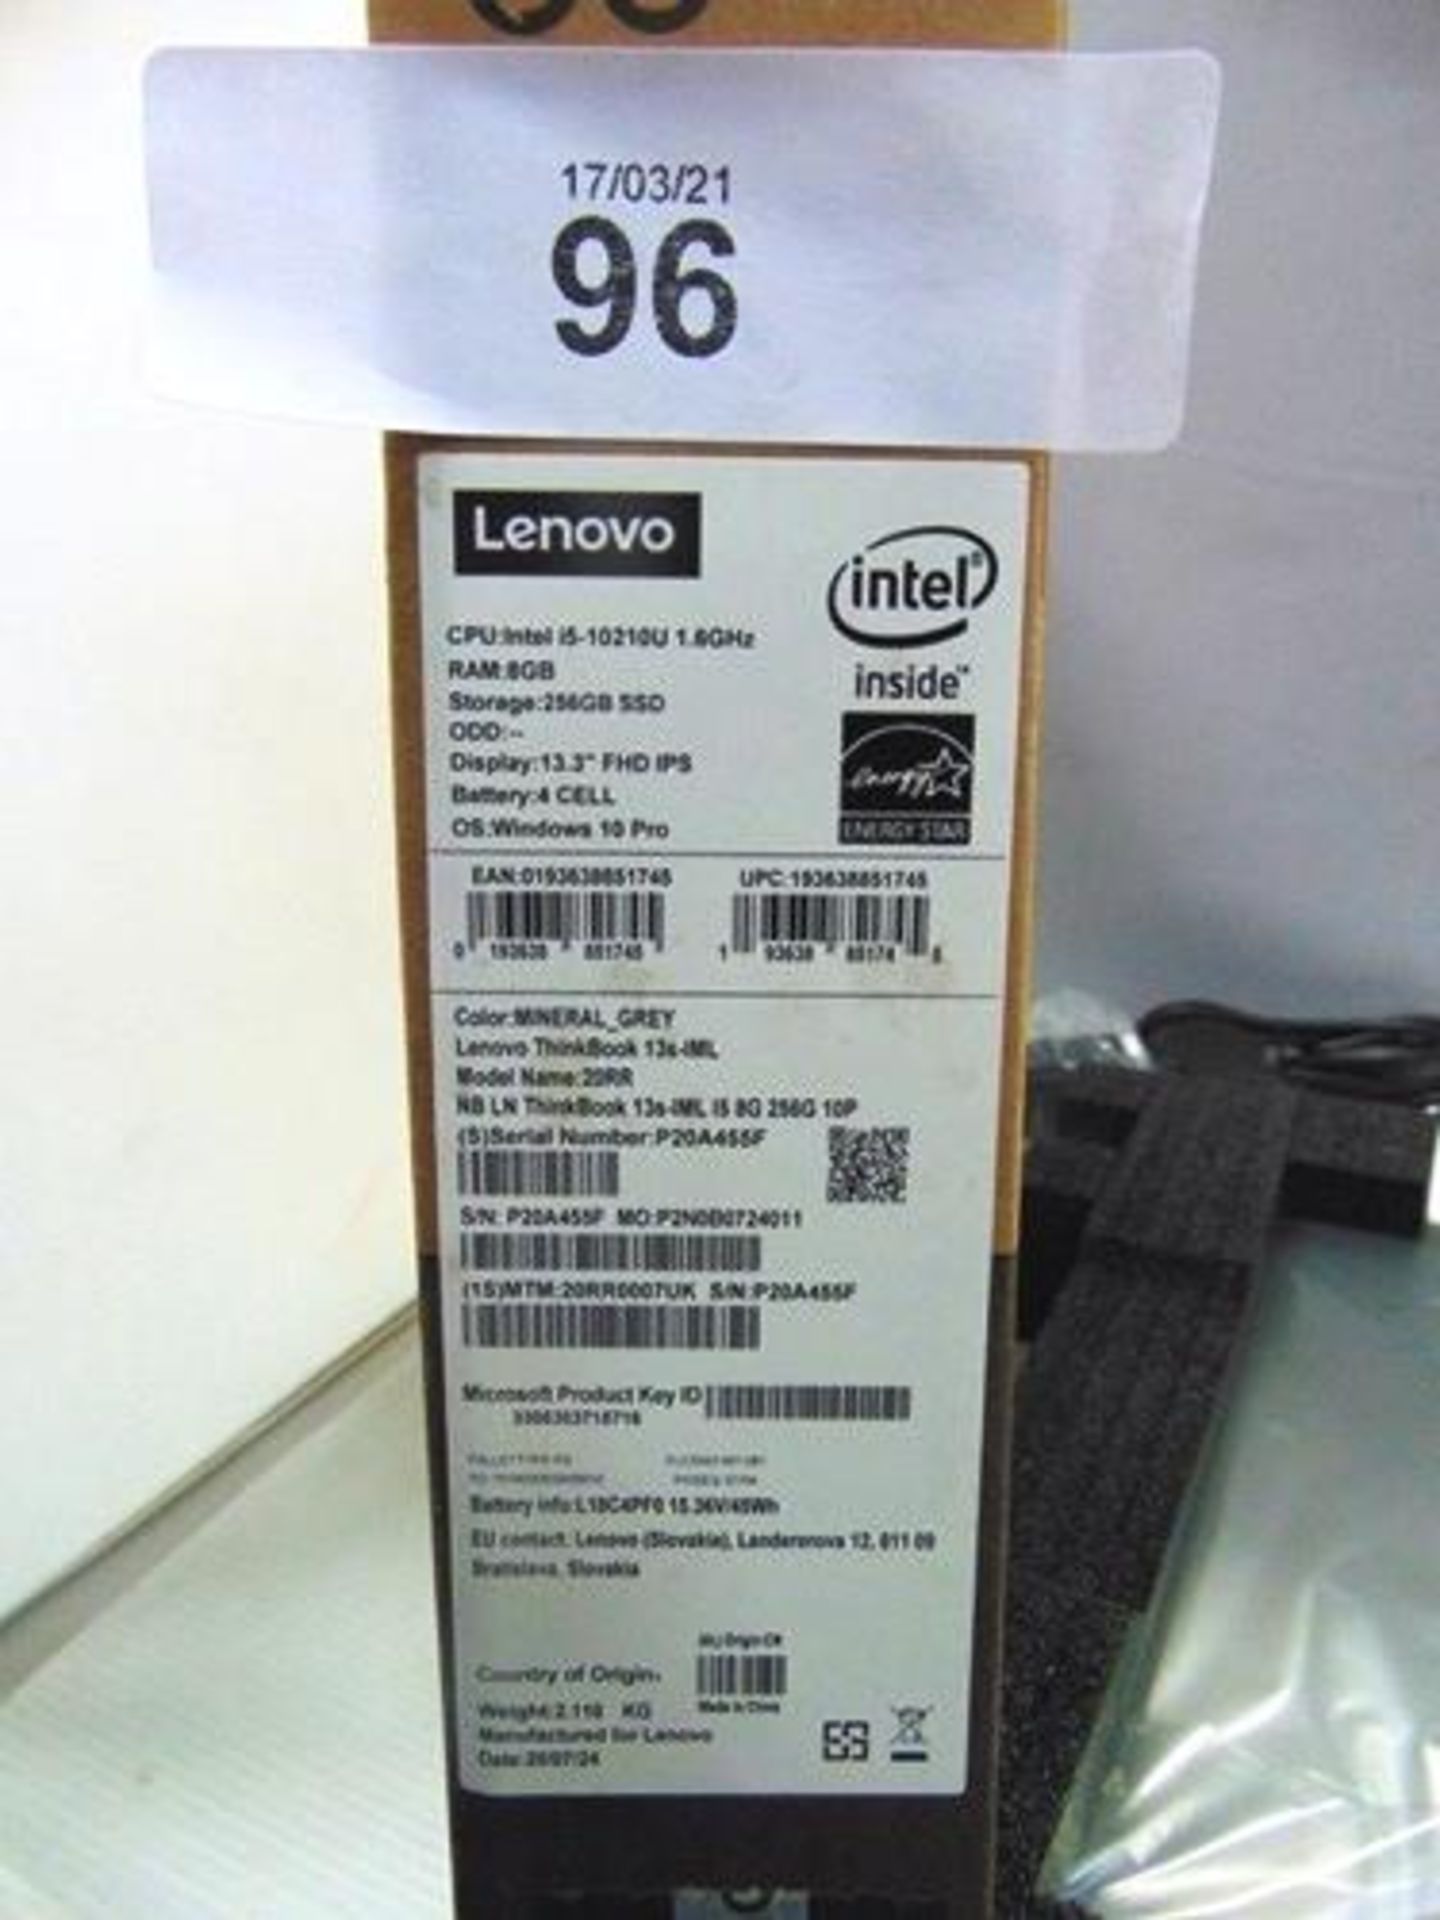 1 x Lenovo ThinkBook 13s laptop, i5 processor, model 20RR0007UK - New in box. This item has not been